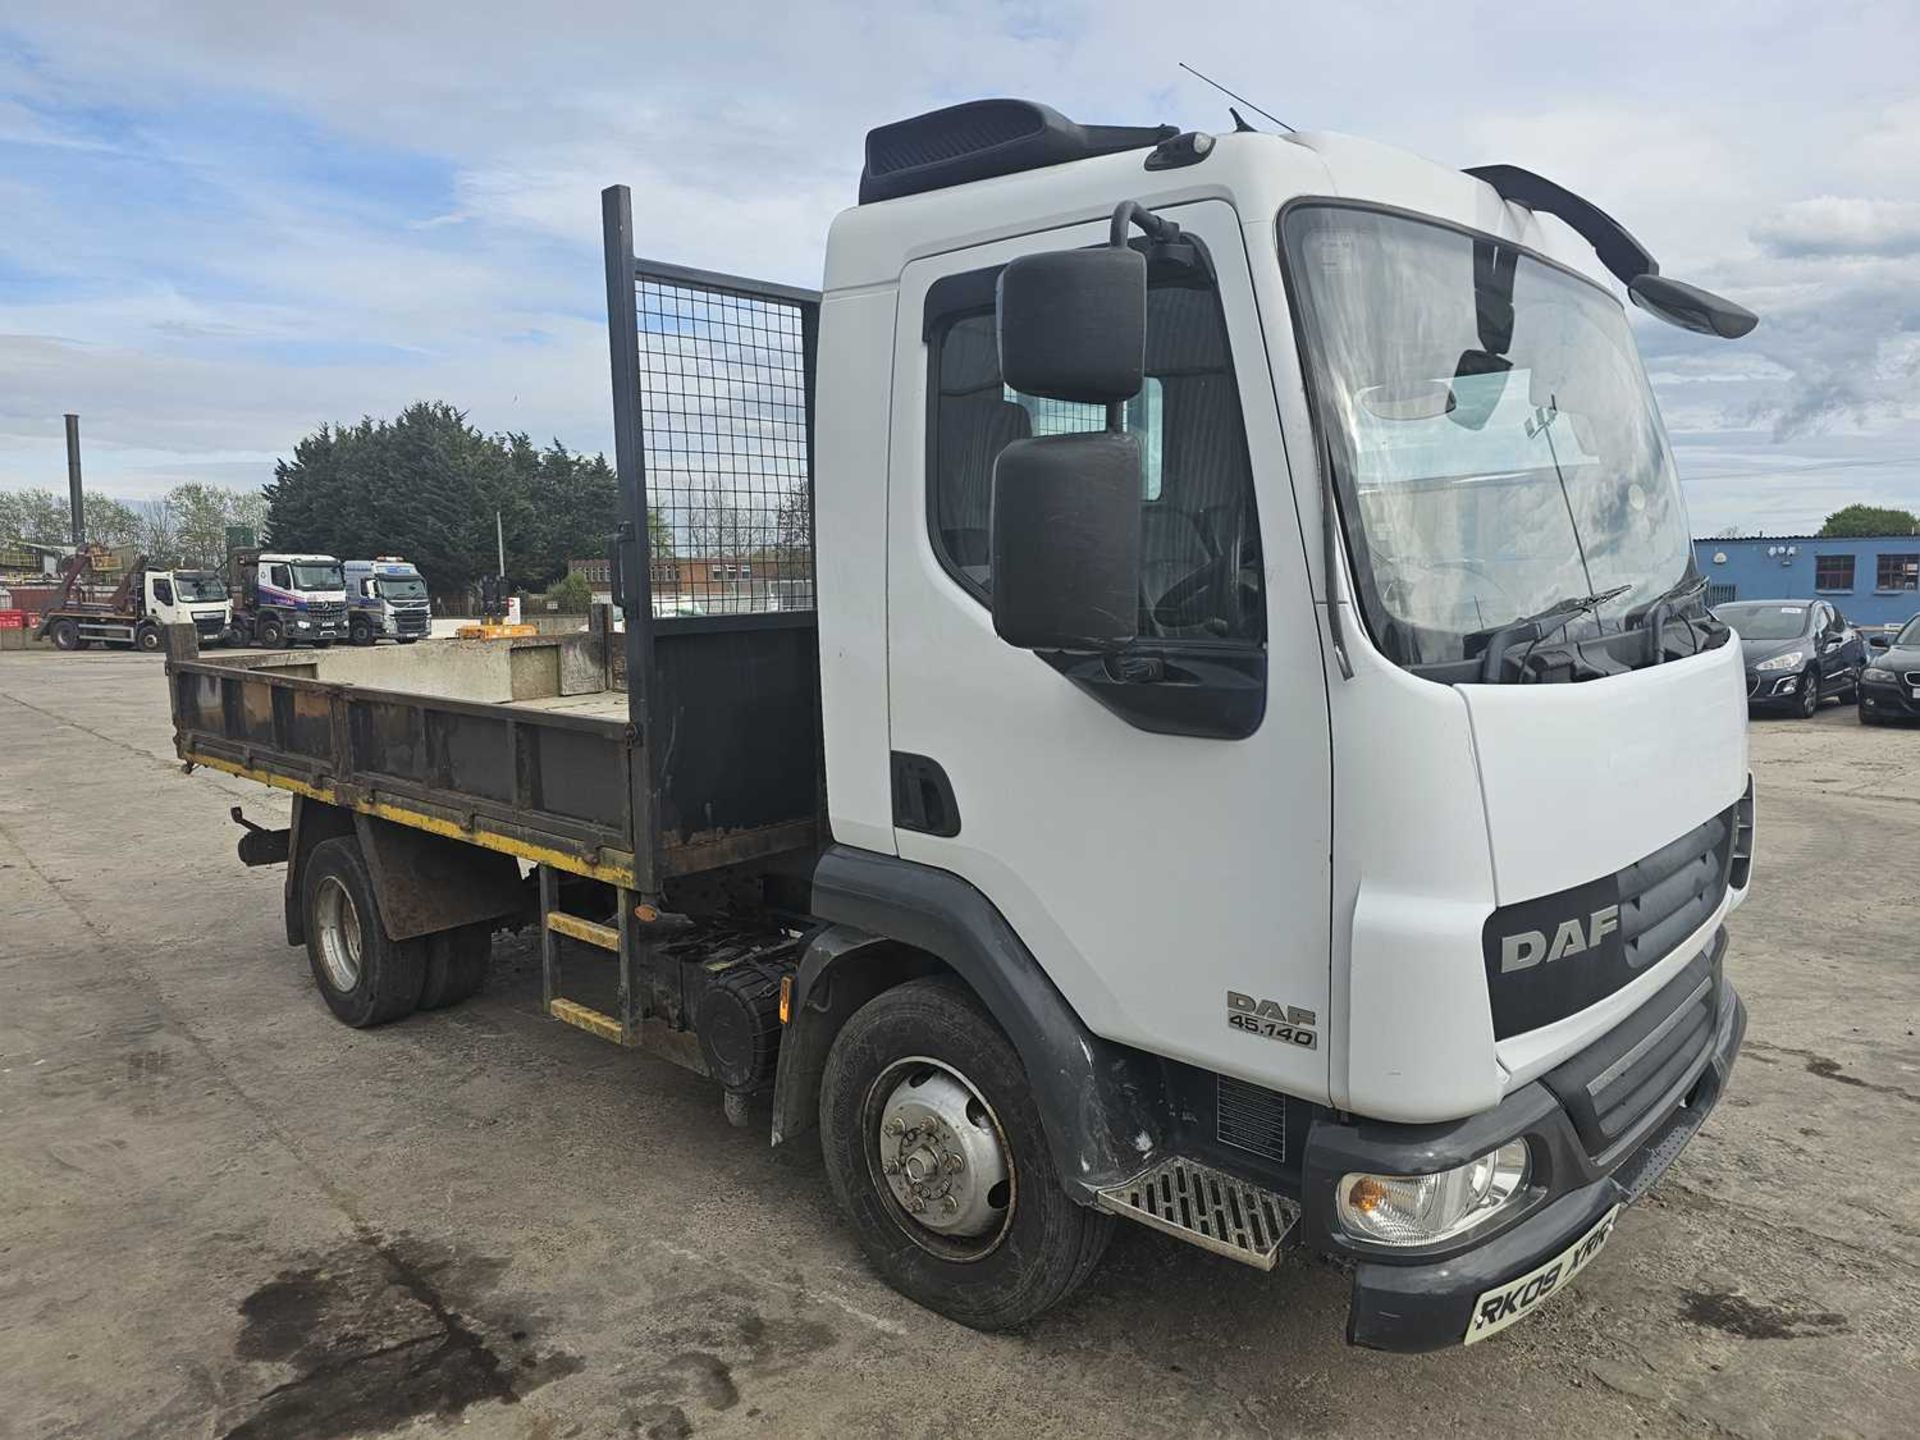 2009 DAF LF45-140 4x2 Dropside Tipper Lorry, Manual Gearbox - Image 8 of 22